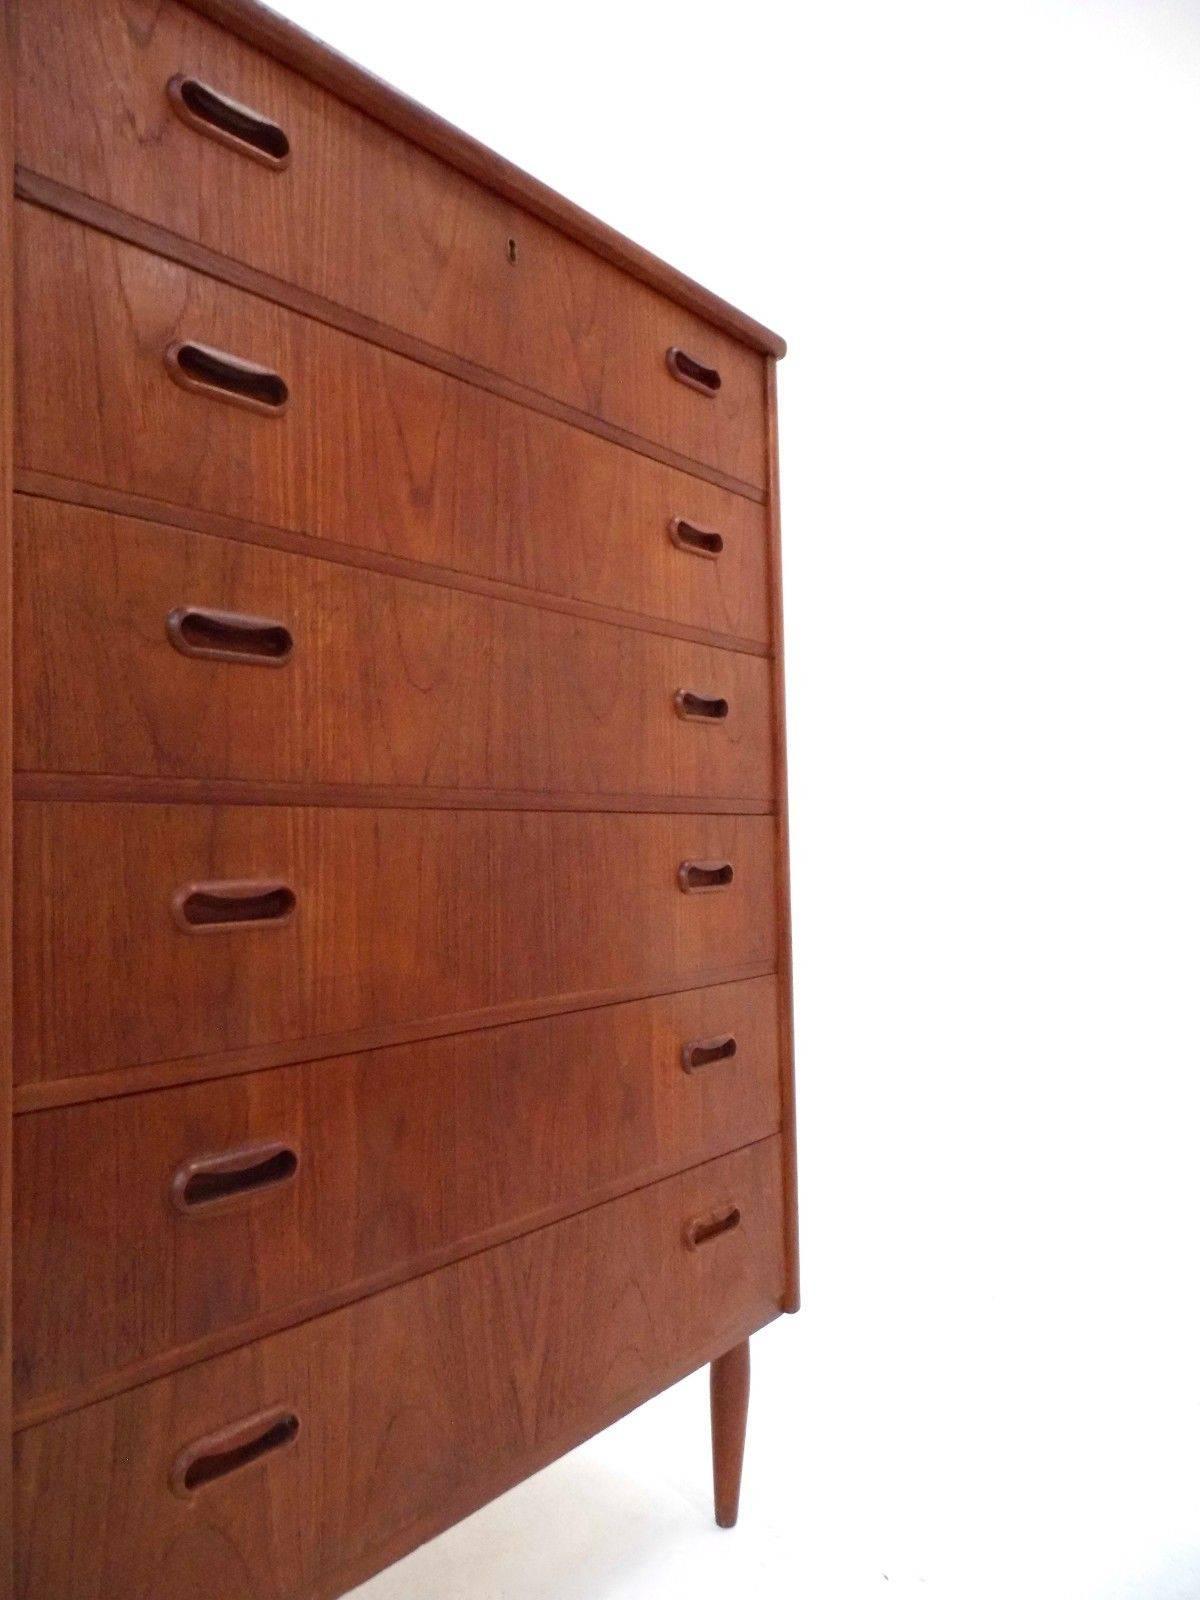 A beautiful Danish teak tallboy chest of drawers, this would make a stylish addition to any bedroom area. The chest has six drawers, all are in good working order with sculptured wooden handles and dovetail joins. A striking piece of classically